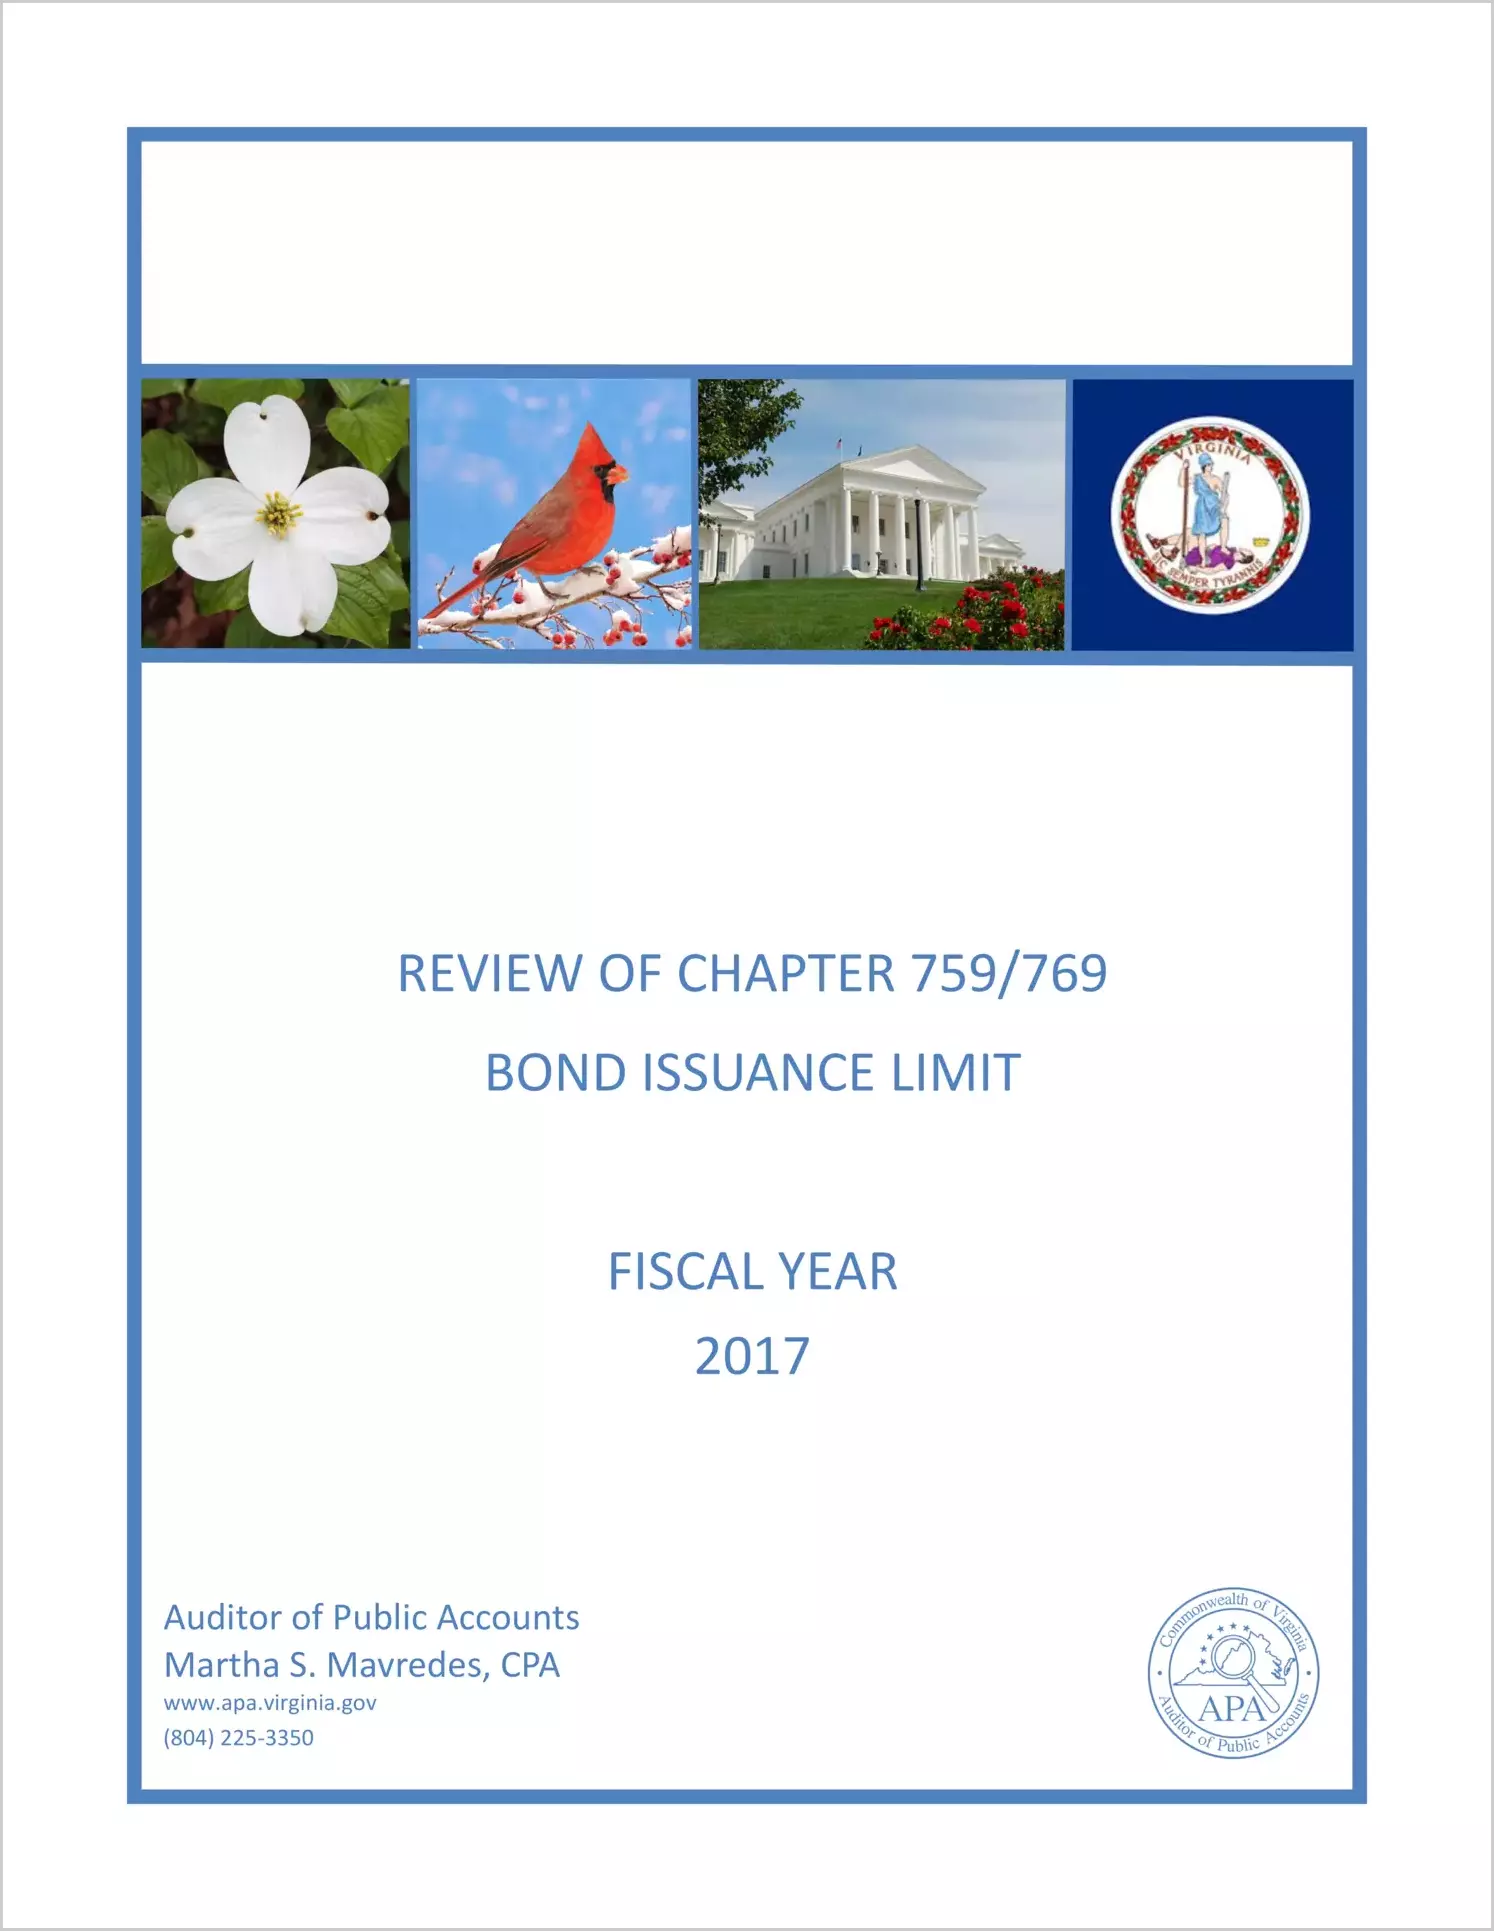 Review of Chapter 759/769 Bond Issuance Limit Fiscal Year 2017